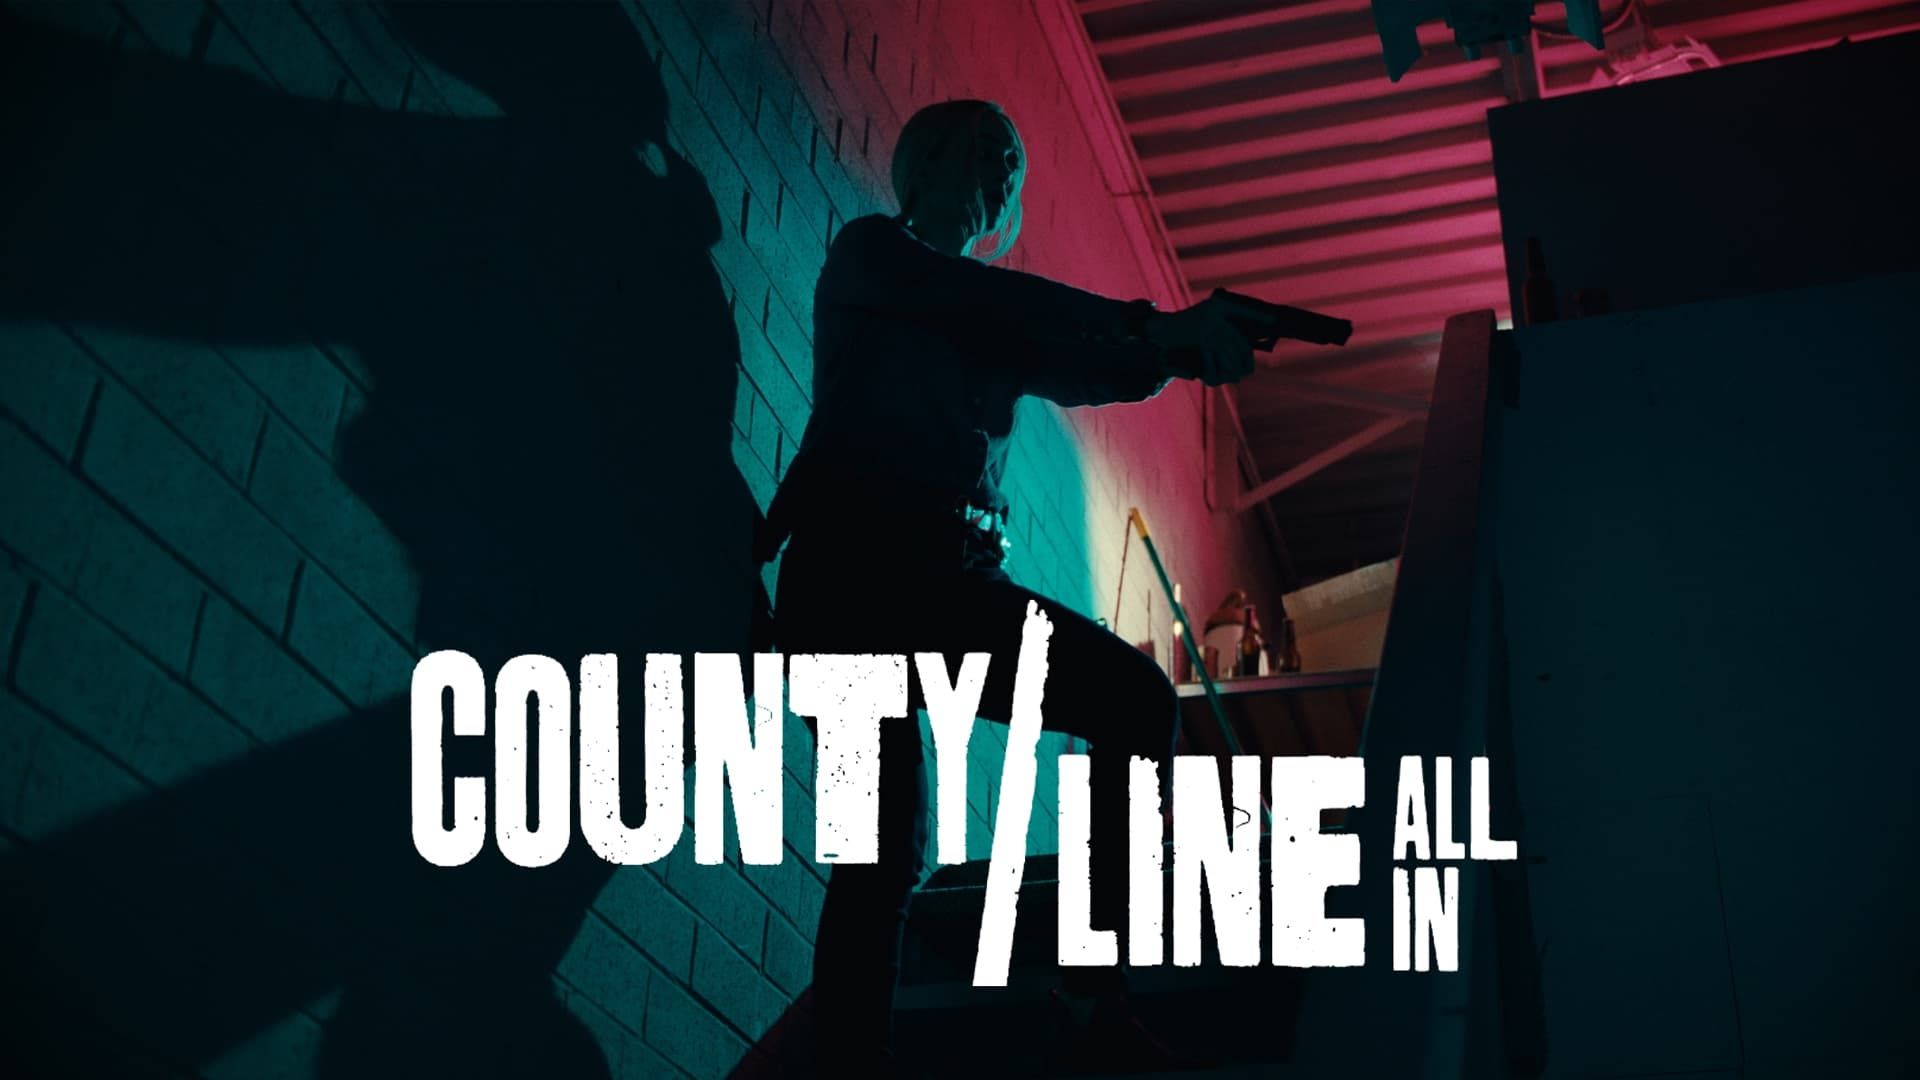 County Line: All In background